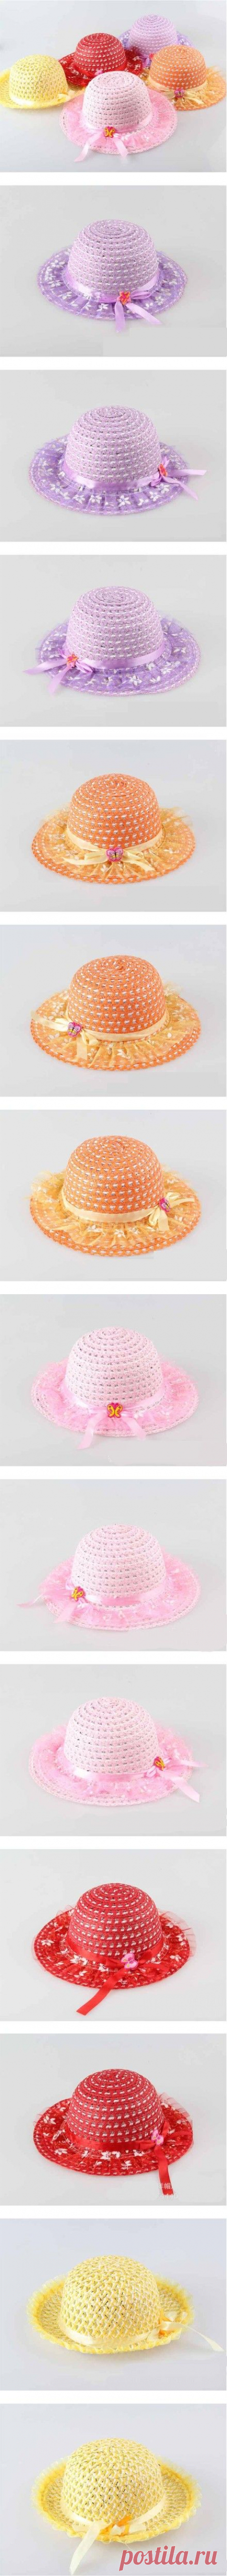 Aliexpress.com : Buy Girls summer baby straw Hats 2015 Fashion Big Flower Caps Chapeu De Praia Korean Children Sun Protection Floppy Beach Hat from Reliable hat club hats suppliers on The perfect pair | Alibaba Group